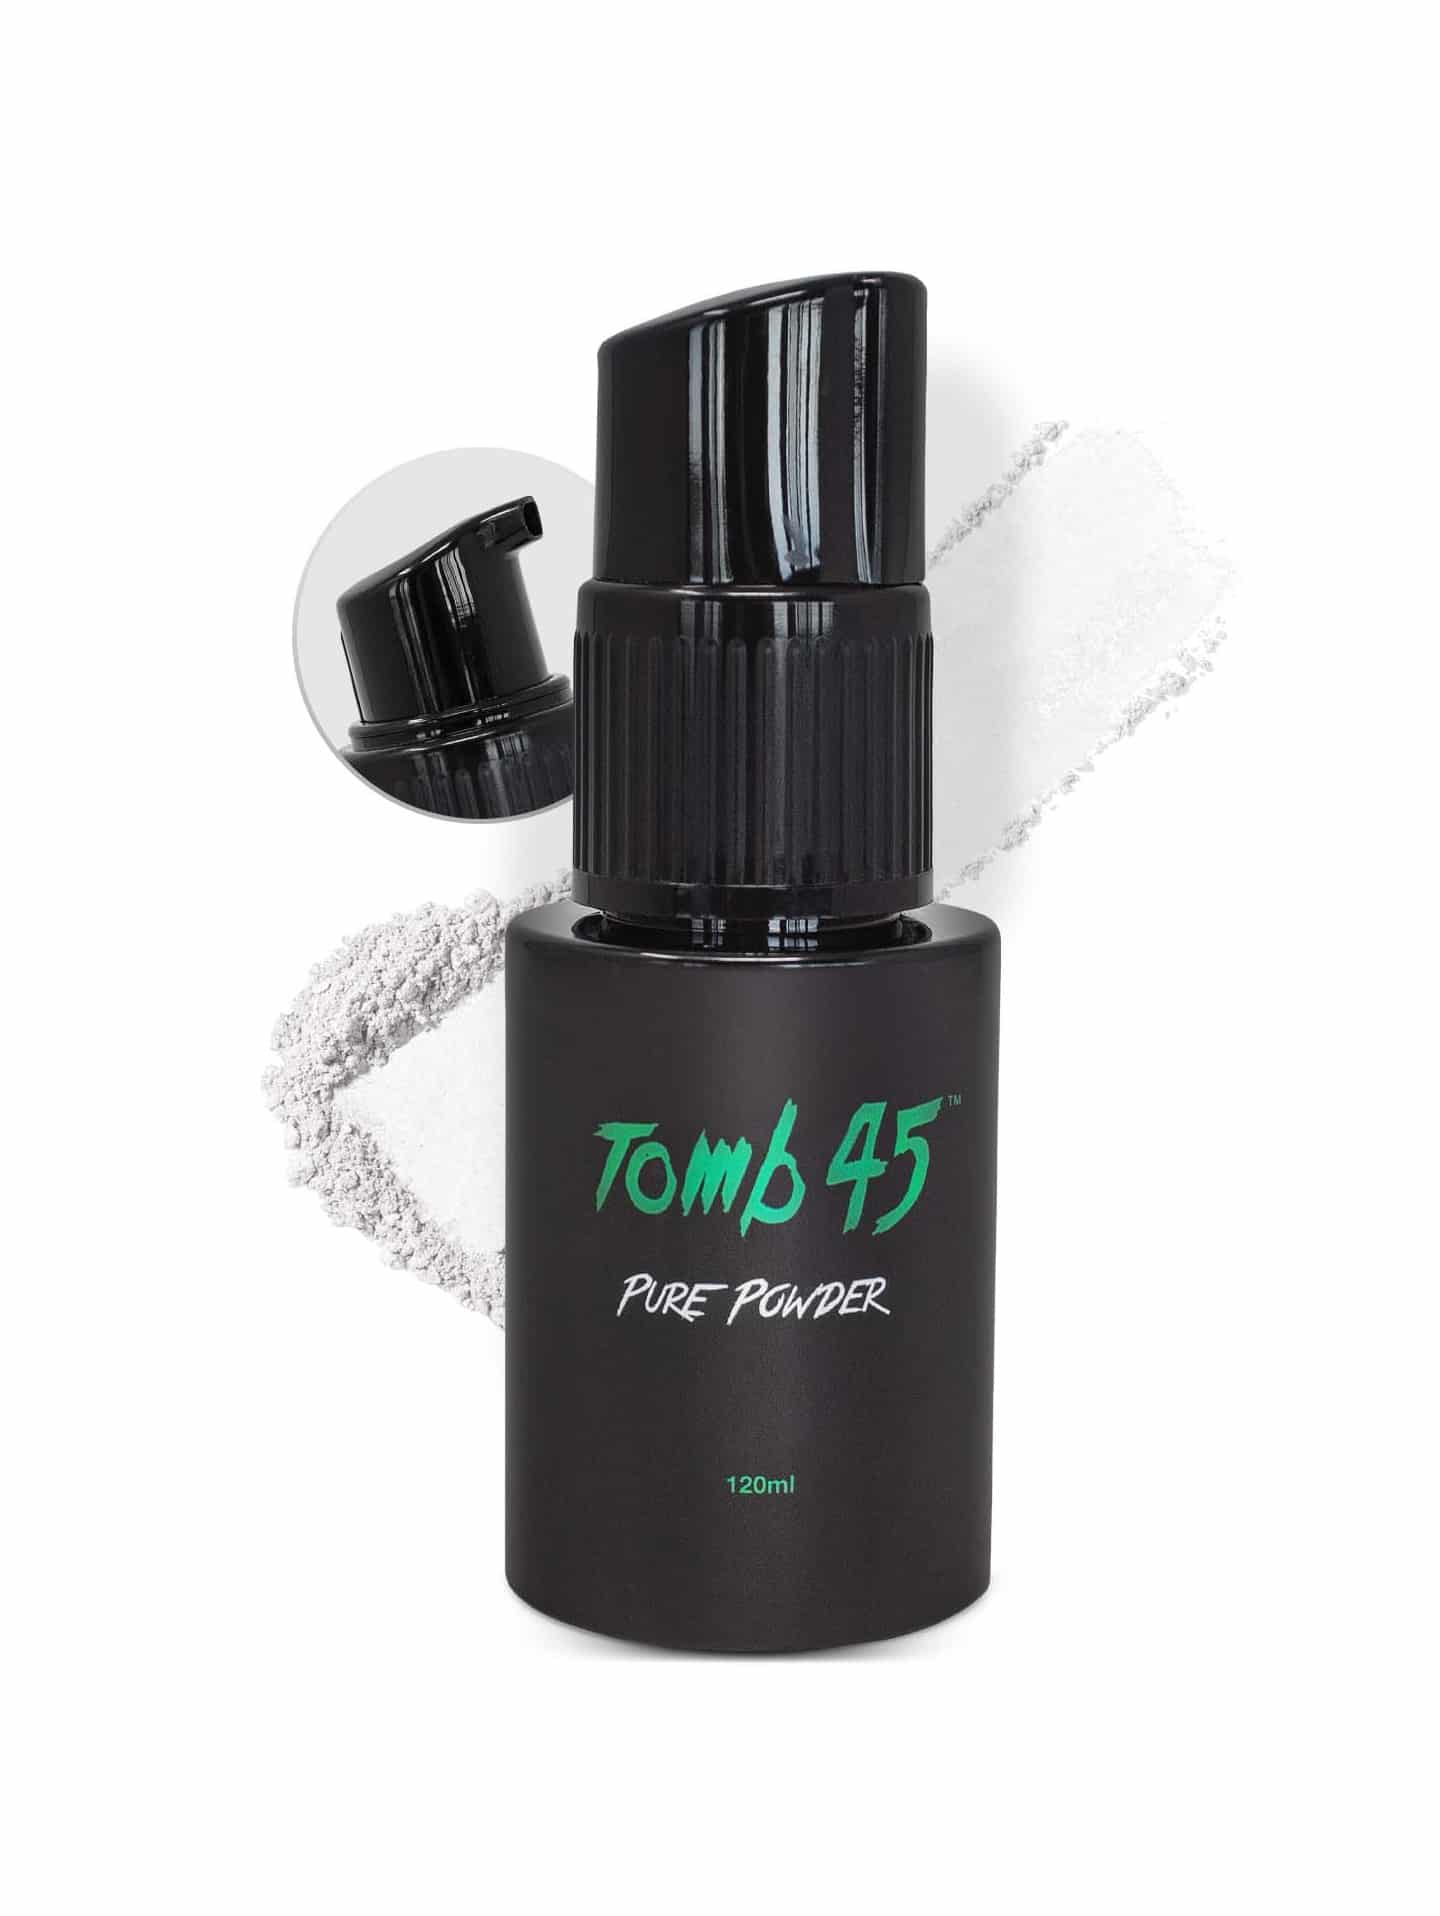 Tomb45 Power Clip Wireless Adapter